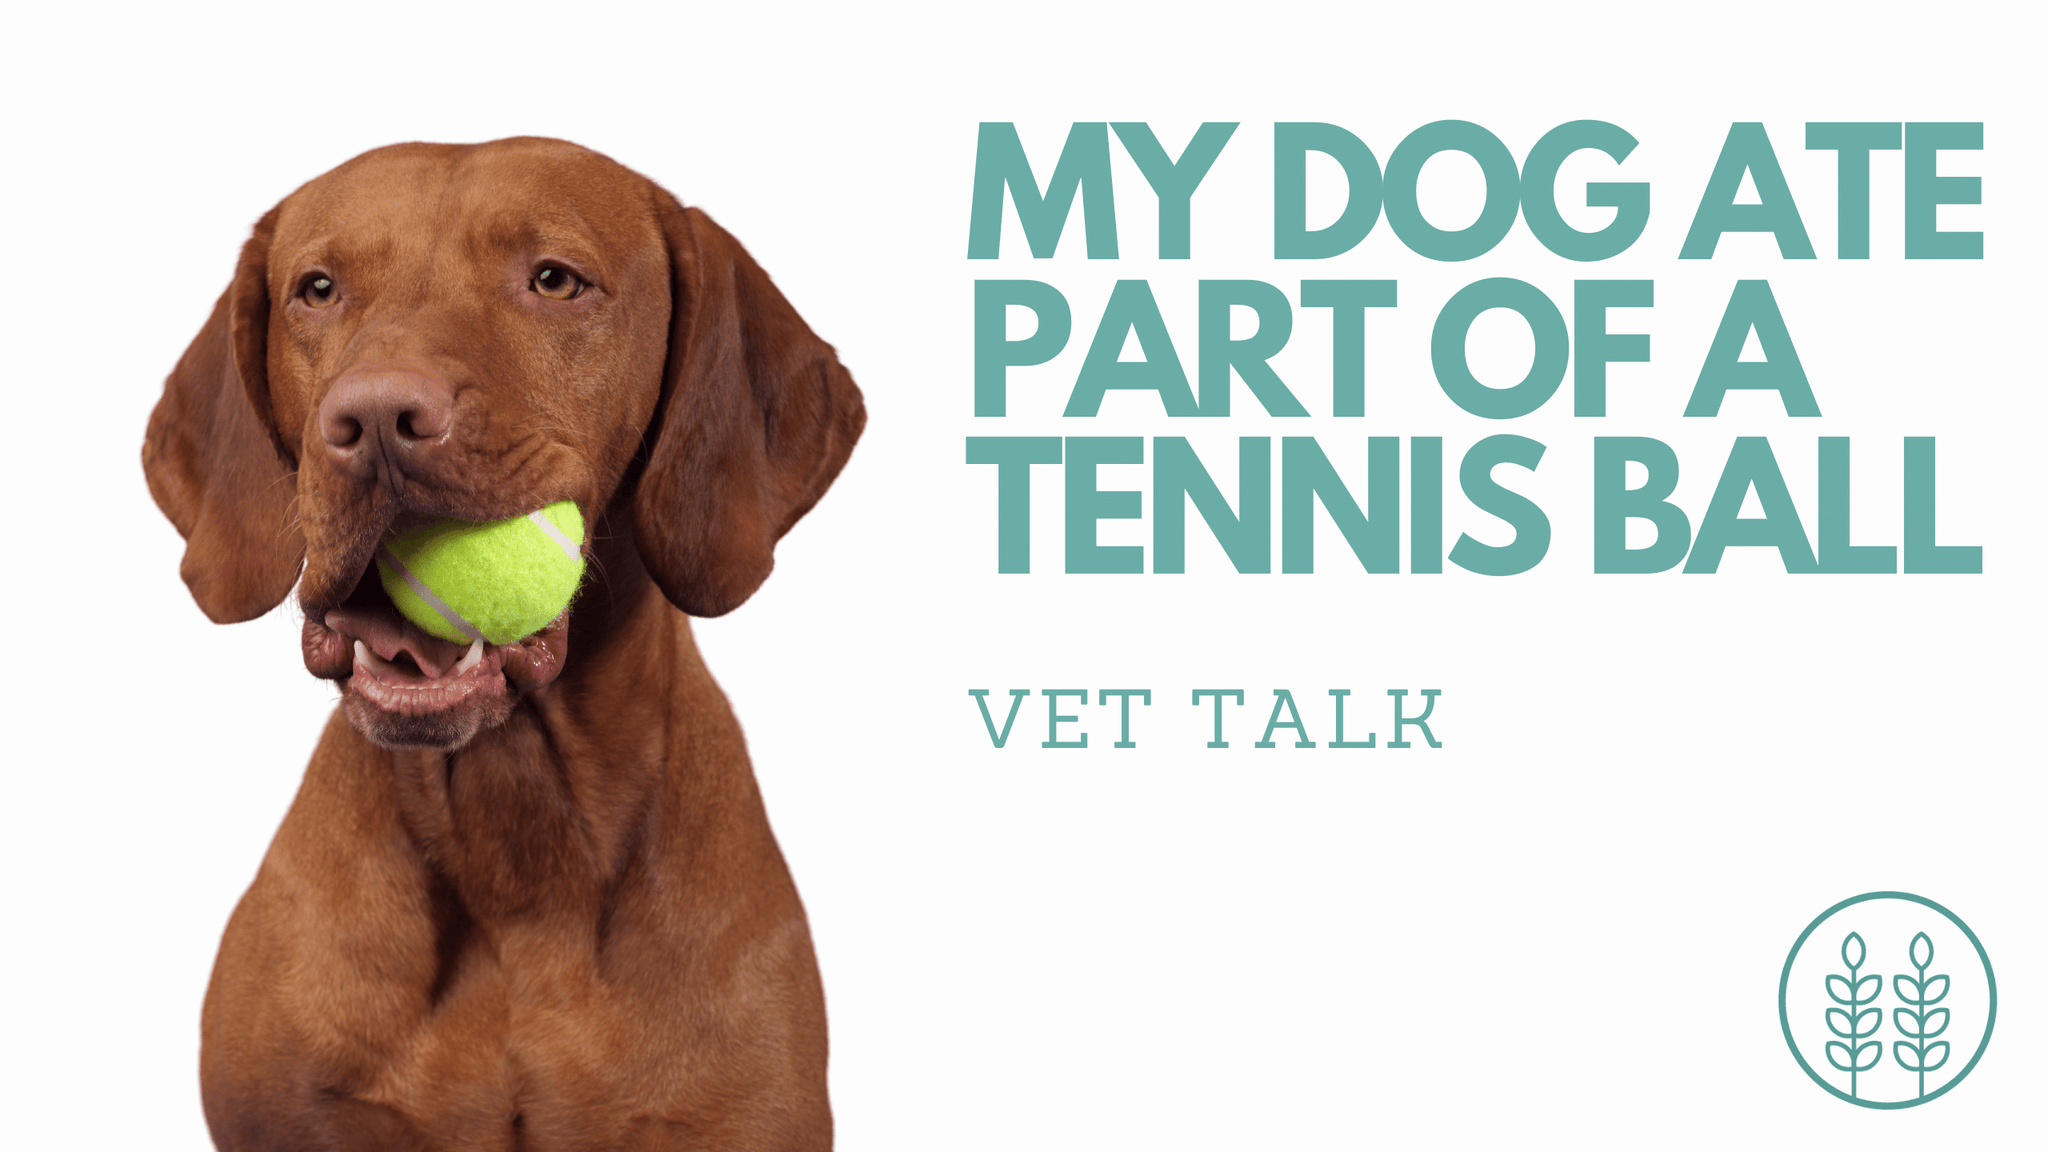 Q: MY DOG ATE PART OF A TENNIS BALL. WHAT DO I DO?